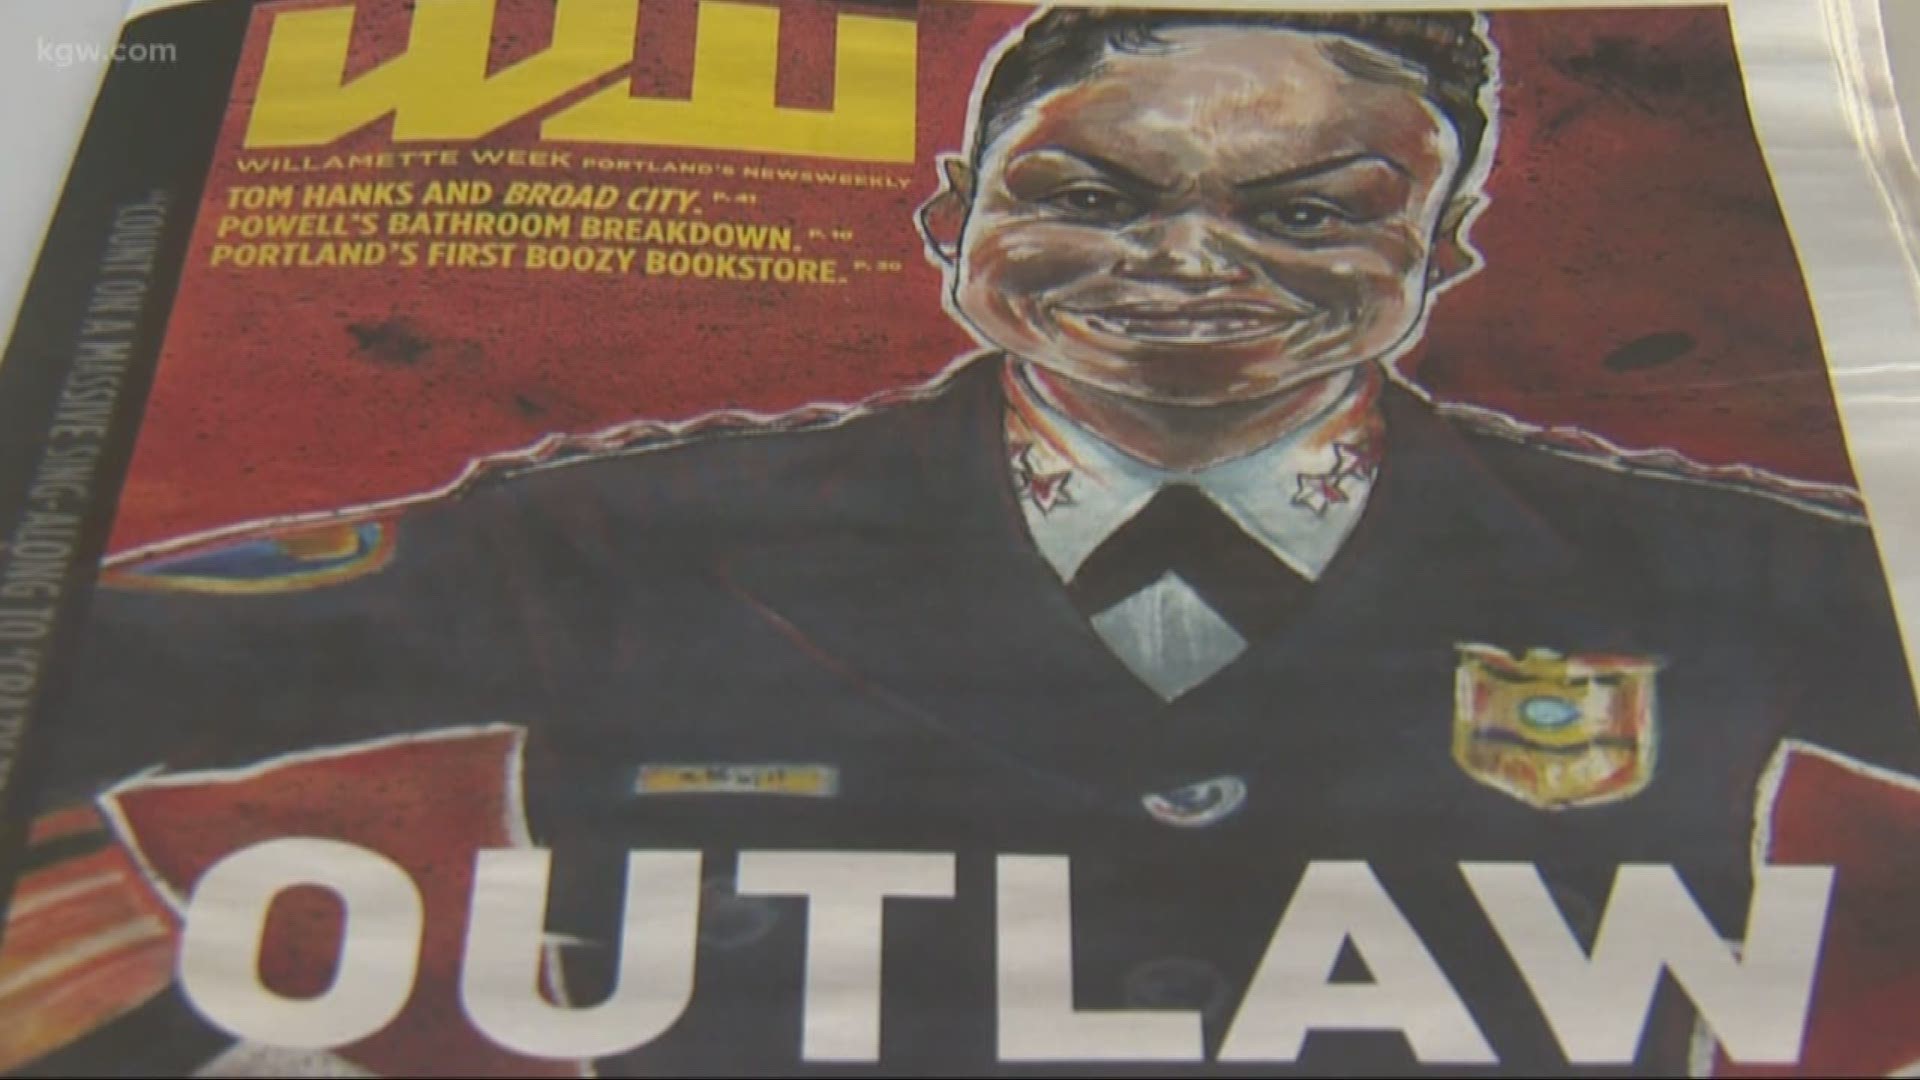 Mayor Wheeler called out the image of Chief Outlaw on Willamette Week's cover.